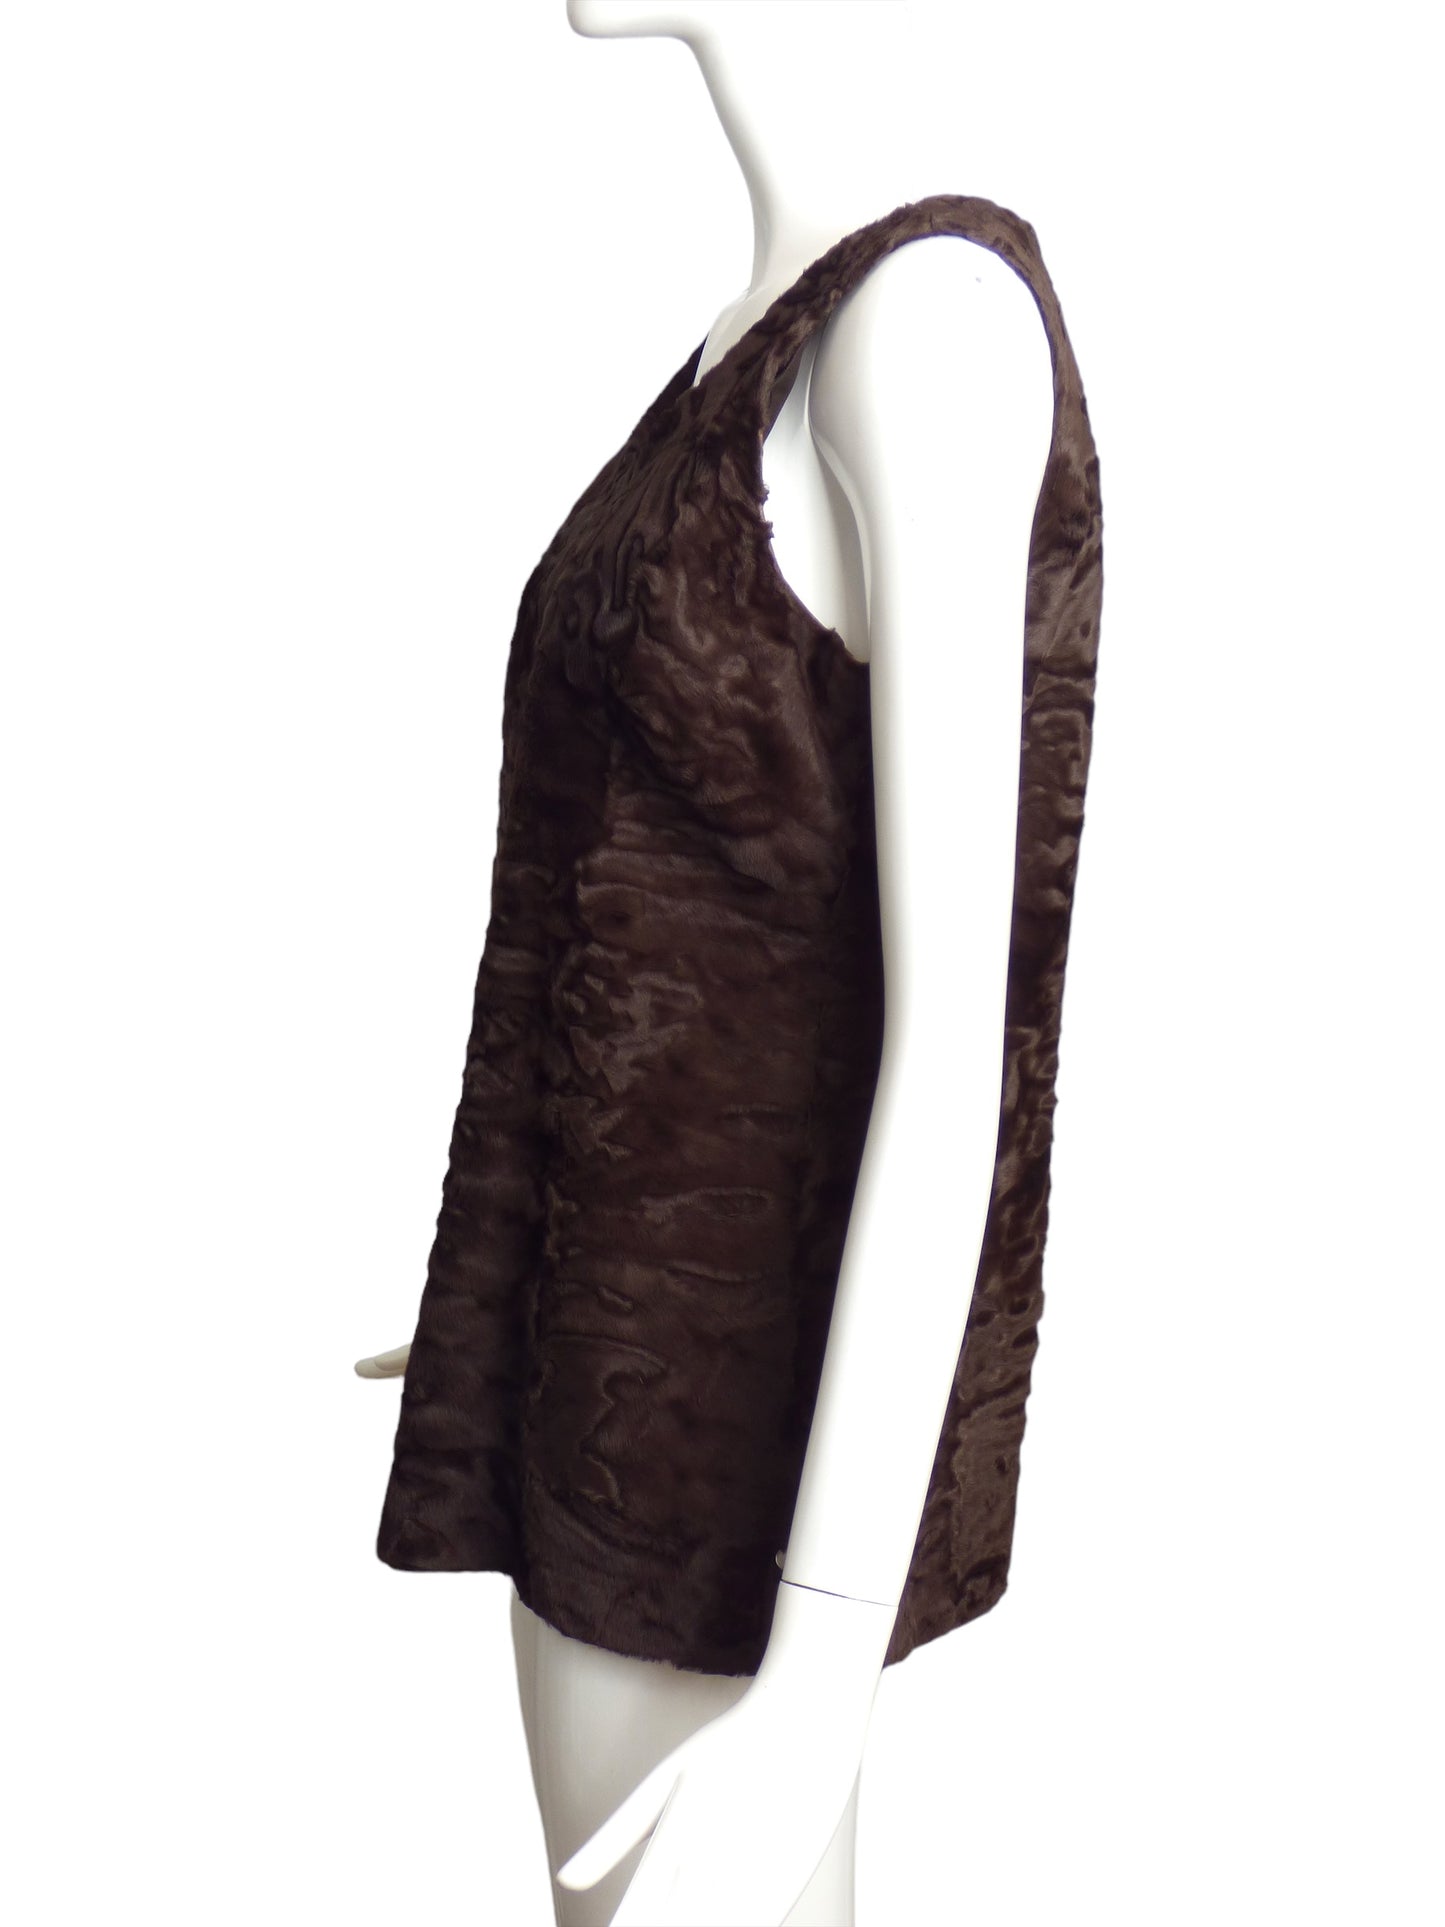 MICHAEL KORS- 1980s Brown Broadtail Tunic, Size 6